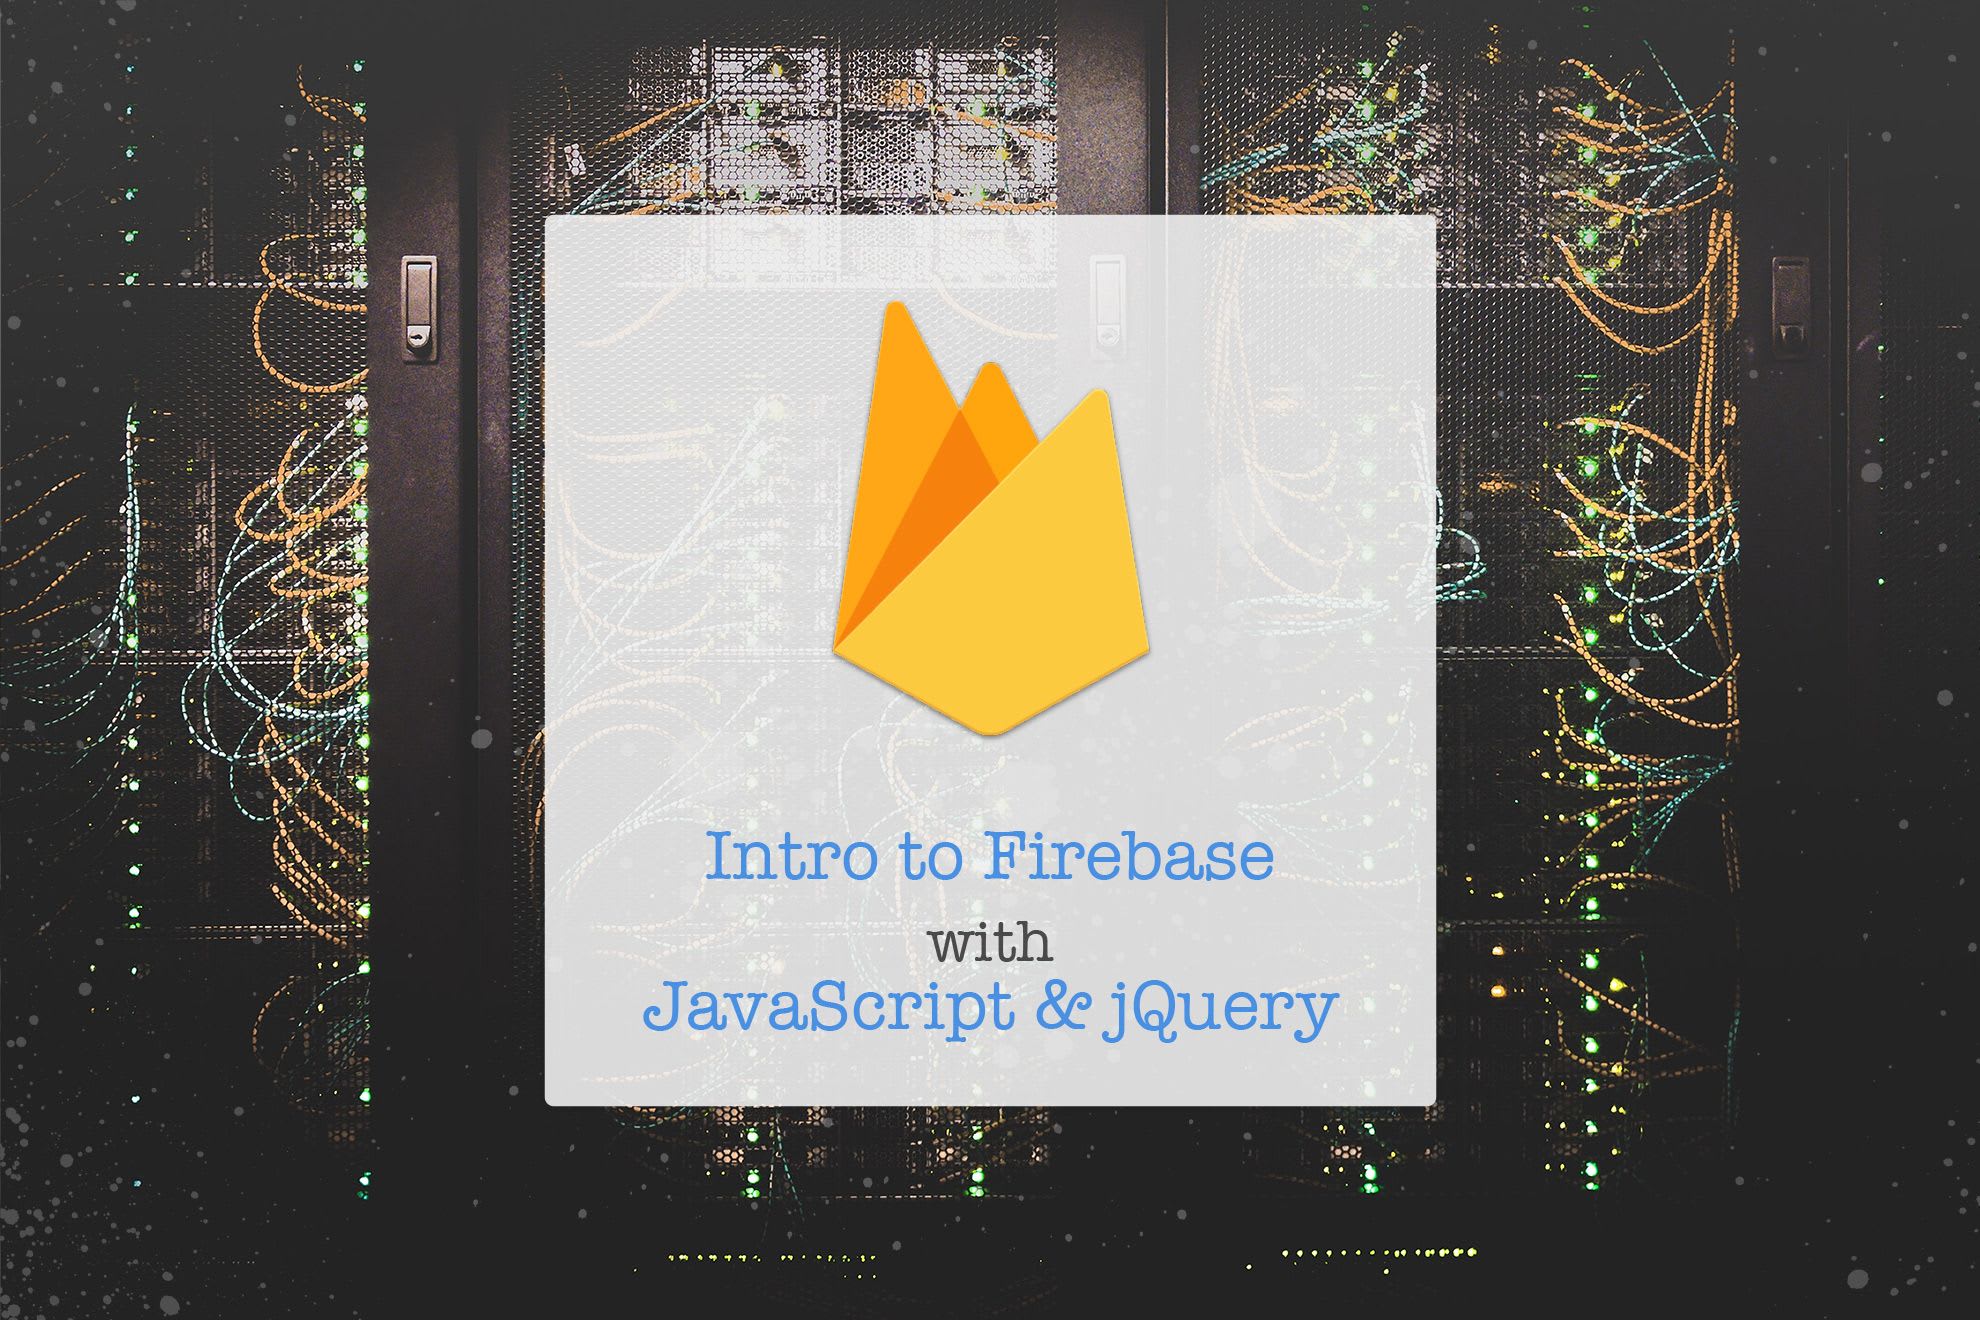 Intro to Firebase with JavaScript and jQuery